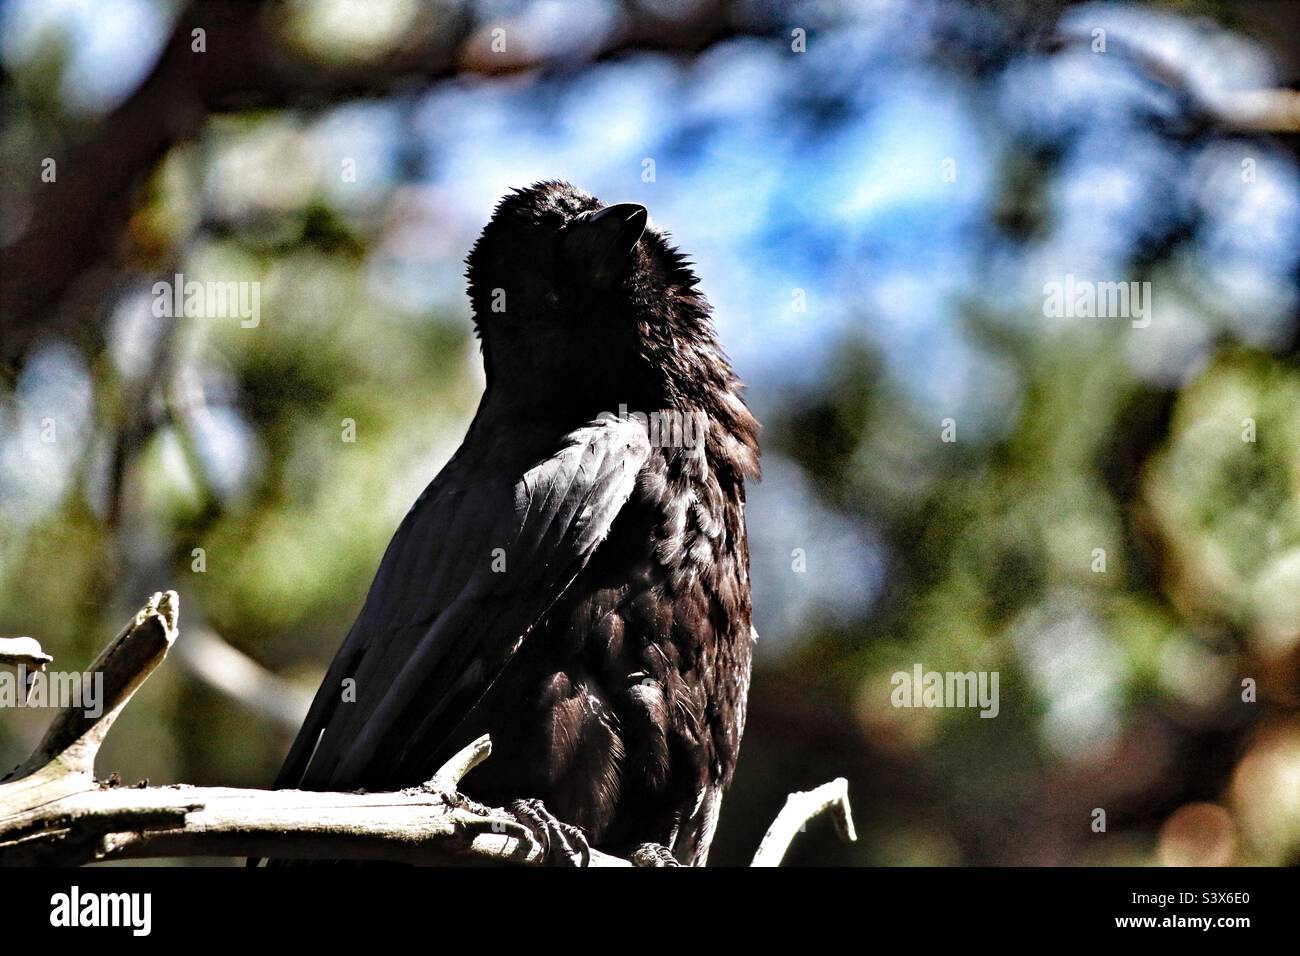 A Crow that is enjoying the sun. This bird is sitting on a branch and enjoying the sun rays in the heatwave. This was taken at Pine Woods in Formby. Stock Photo